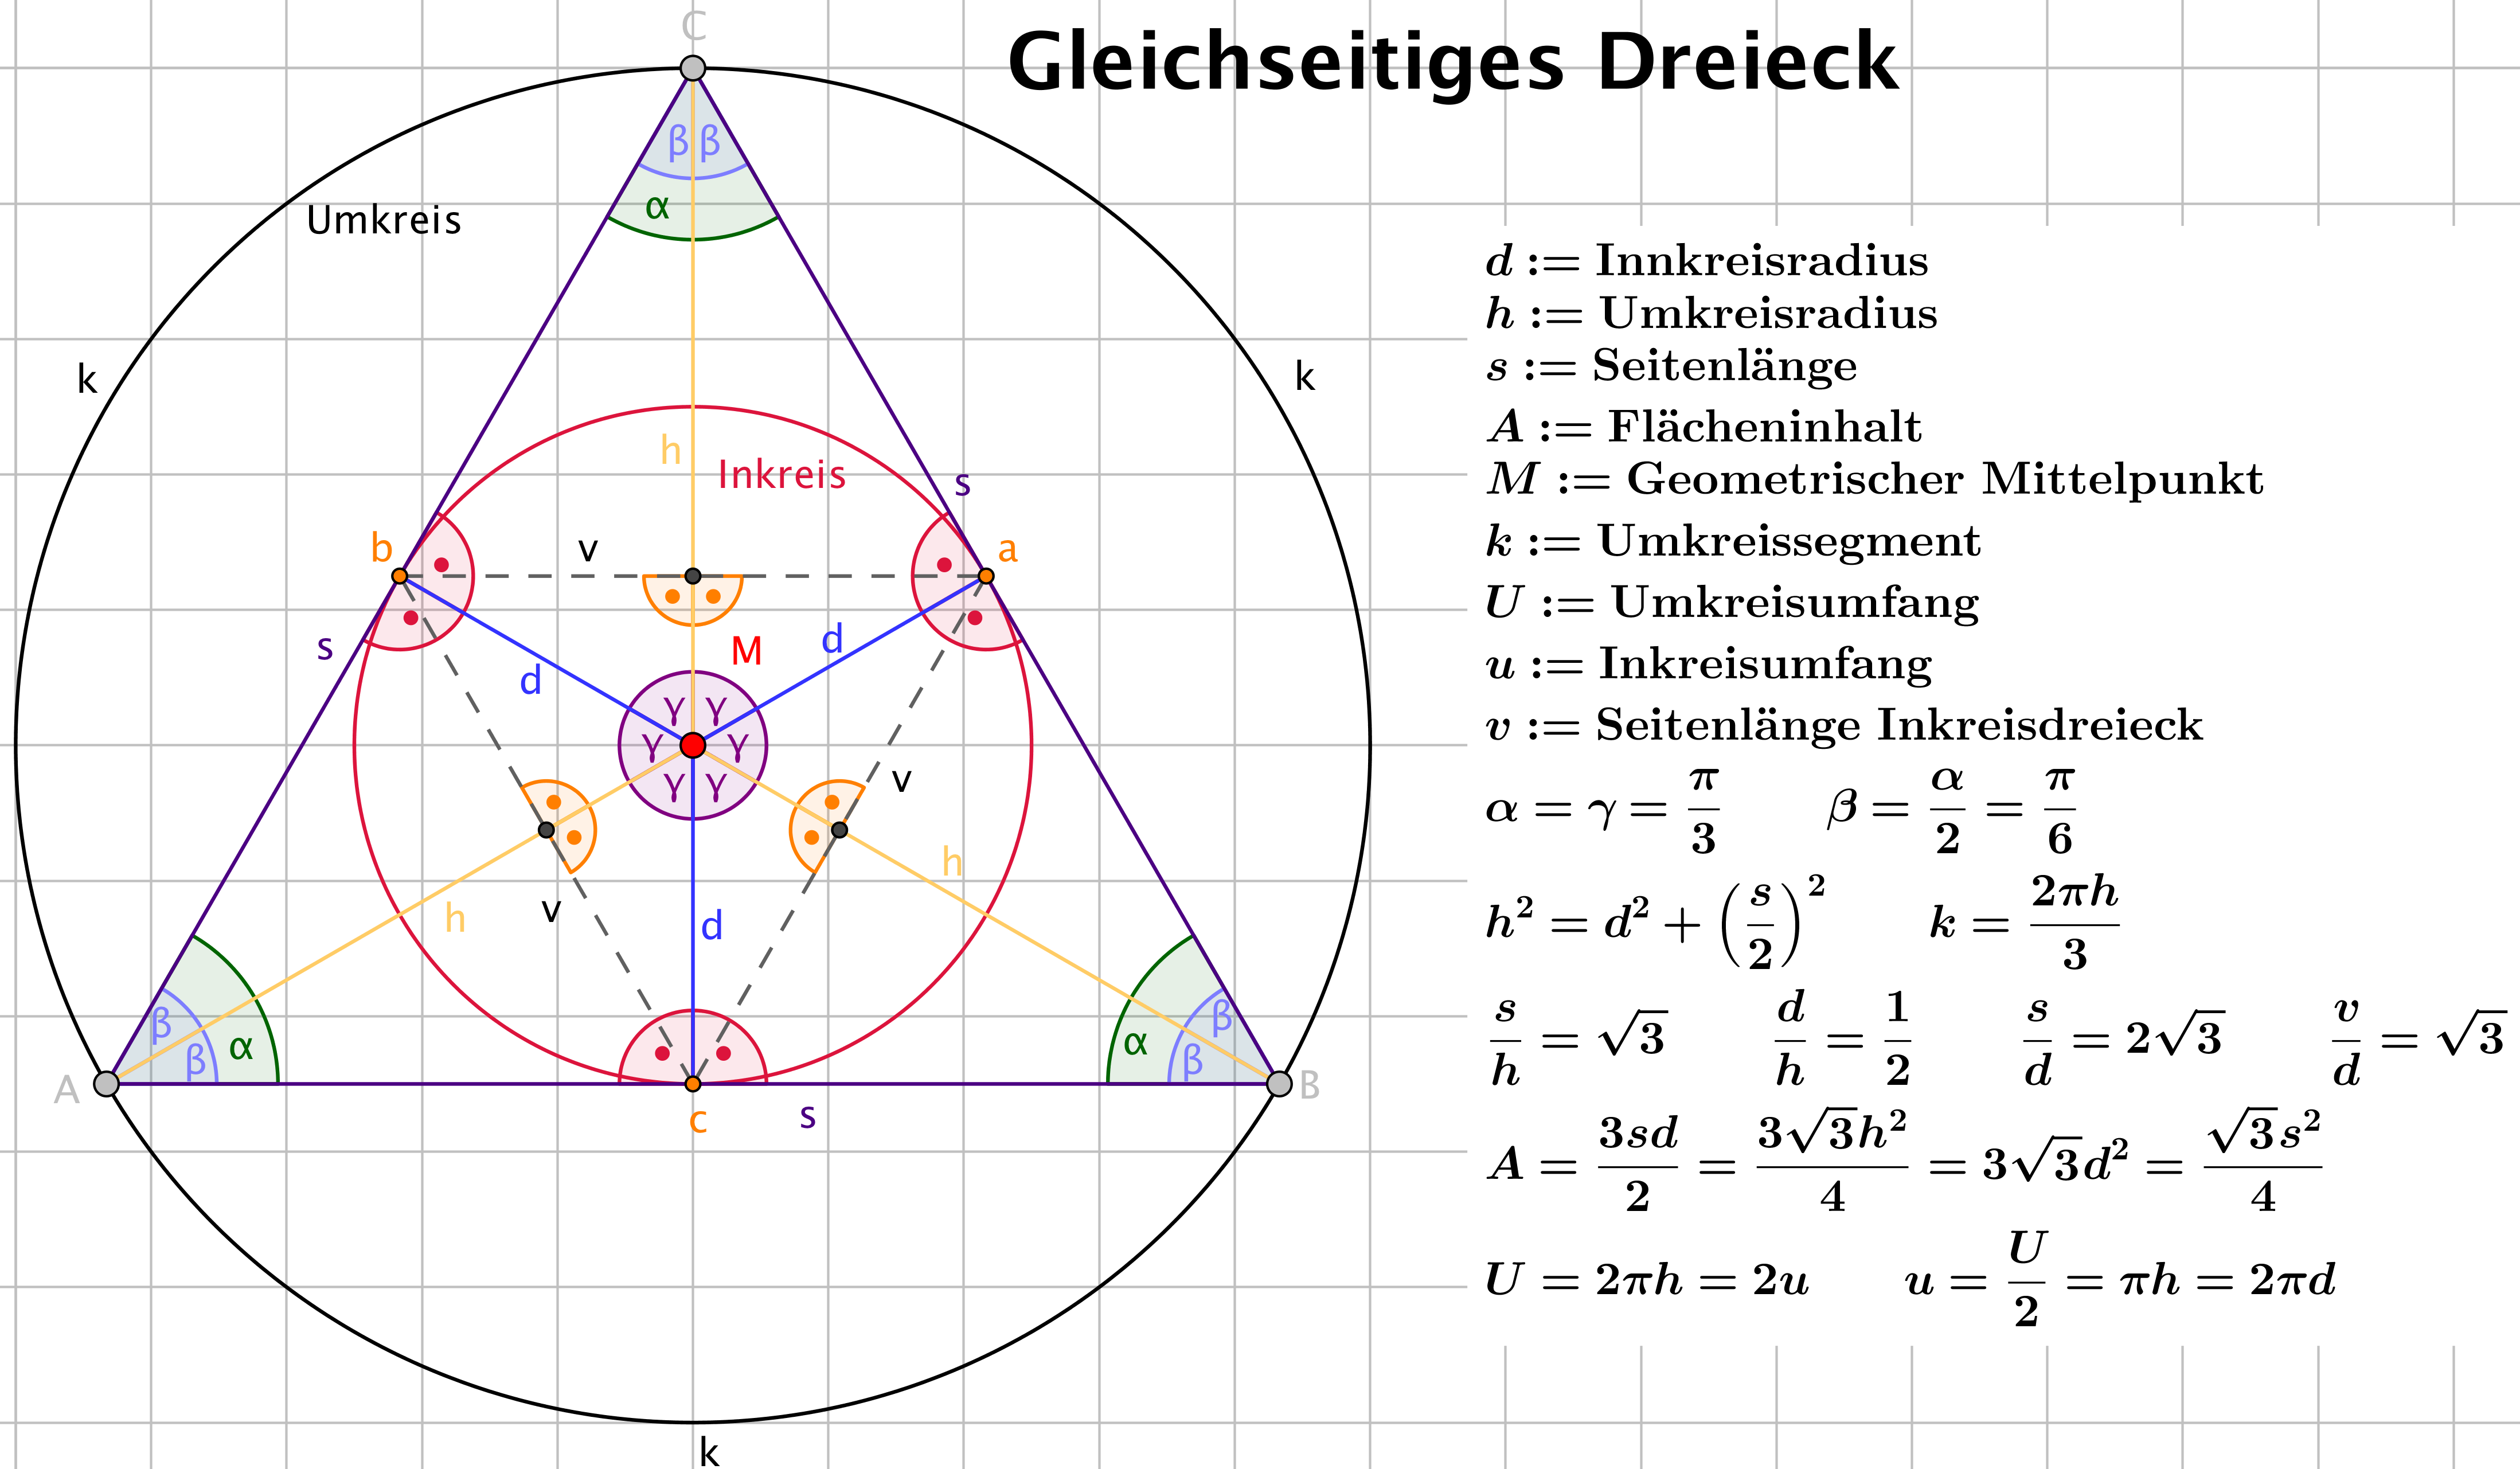 File:Gleichseitiges Dreieck.png - Wikimedia Commons